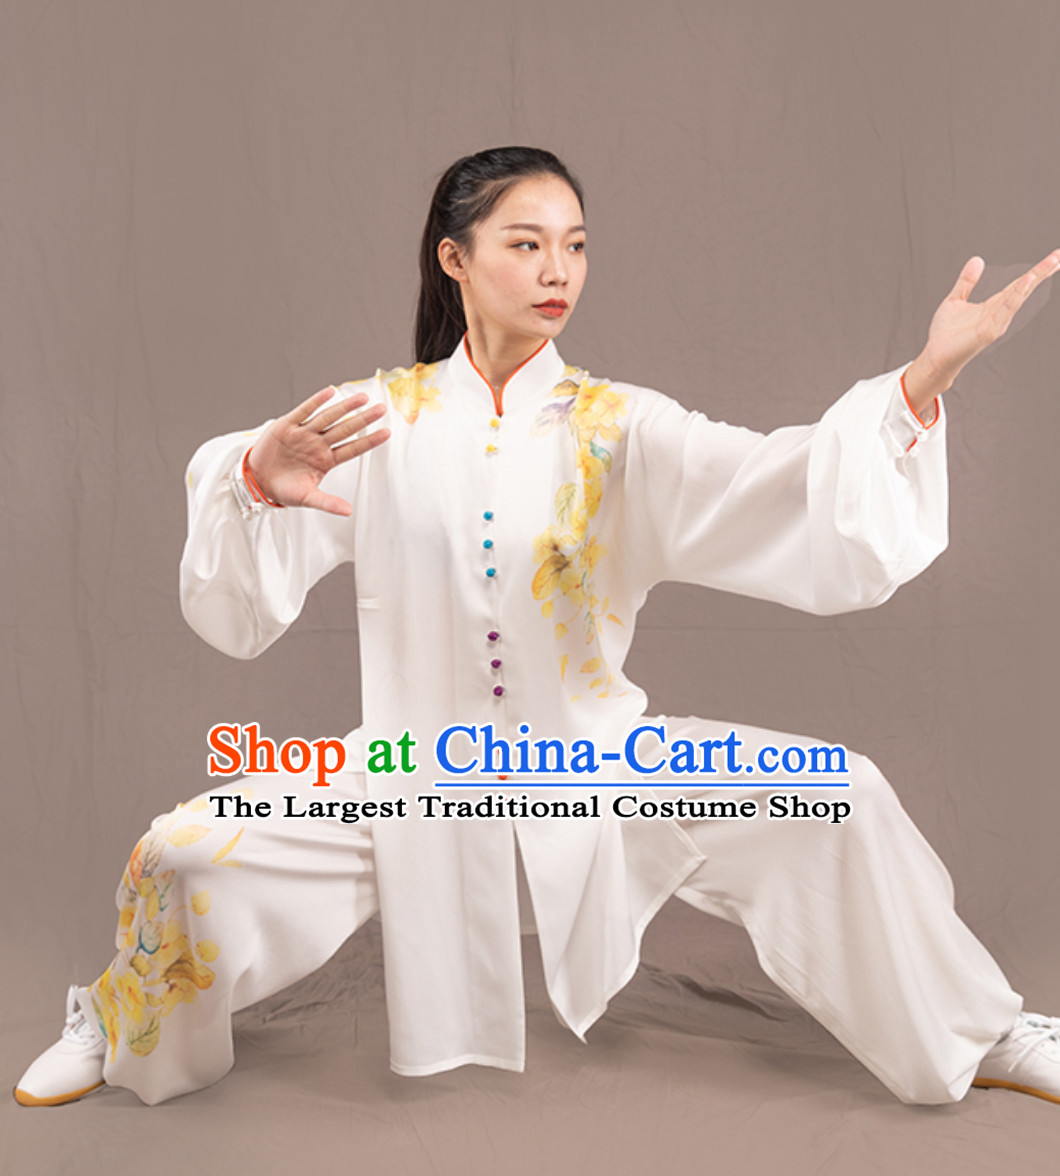 Top Chinese Traditional Competition Championship Professional Tai Chi Uniforms Taiji Kung Fu Wing Chun Kungfu Tai Ji Sword Gong Fu Master Stage Suits Clothes Complete Set